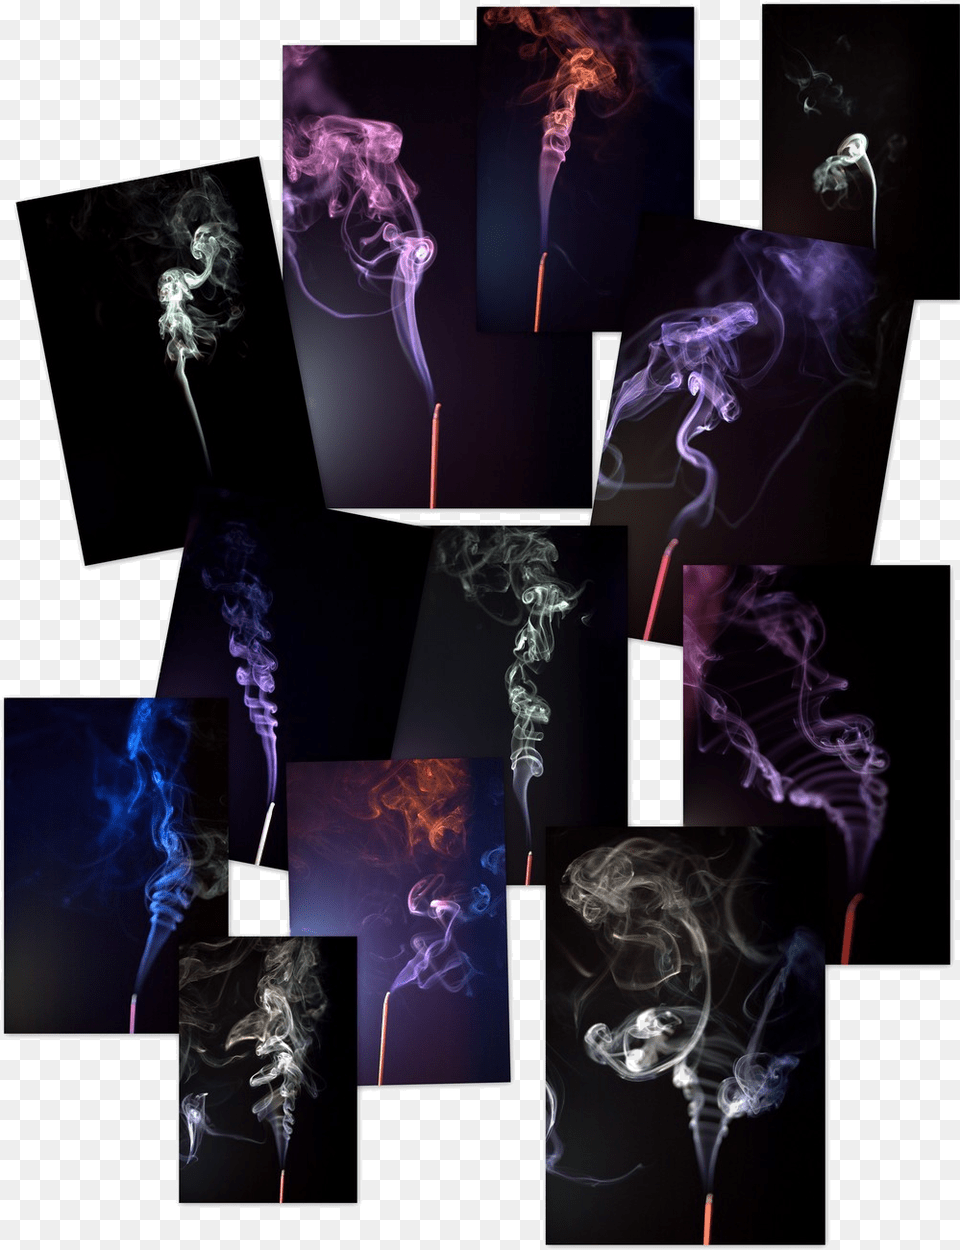 Photography Smoke Colors Of The Rainbow 0125 U2013 Cycling Graphic Design, Art, Collage, Adult, Bride Png